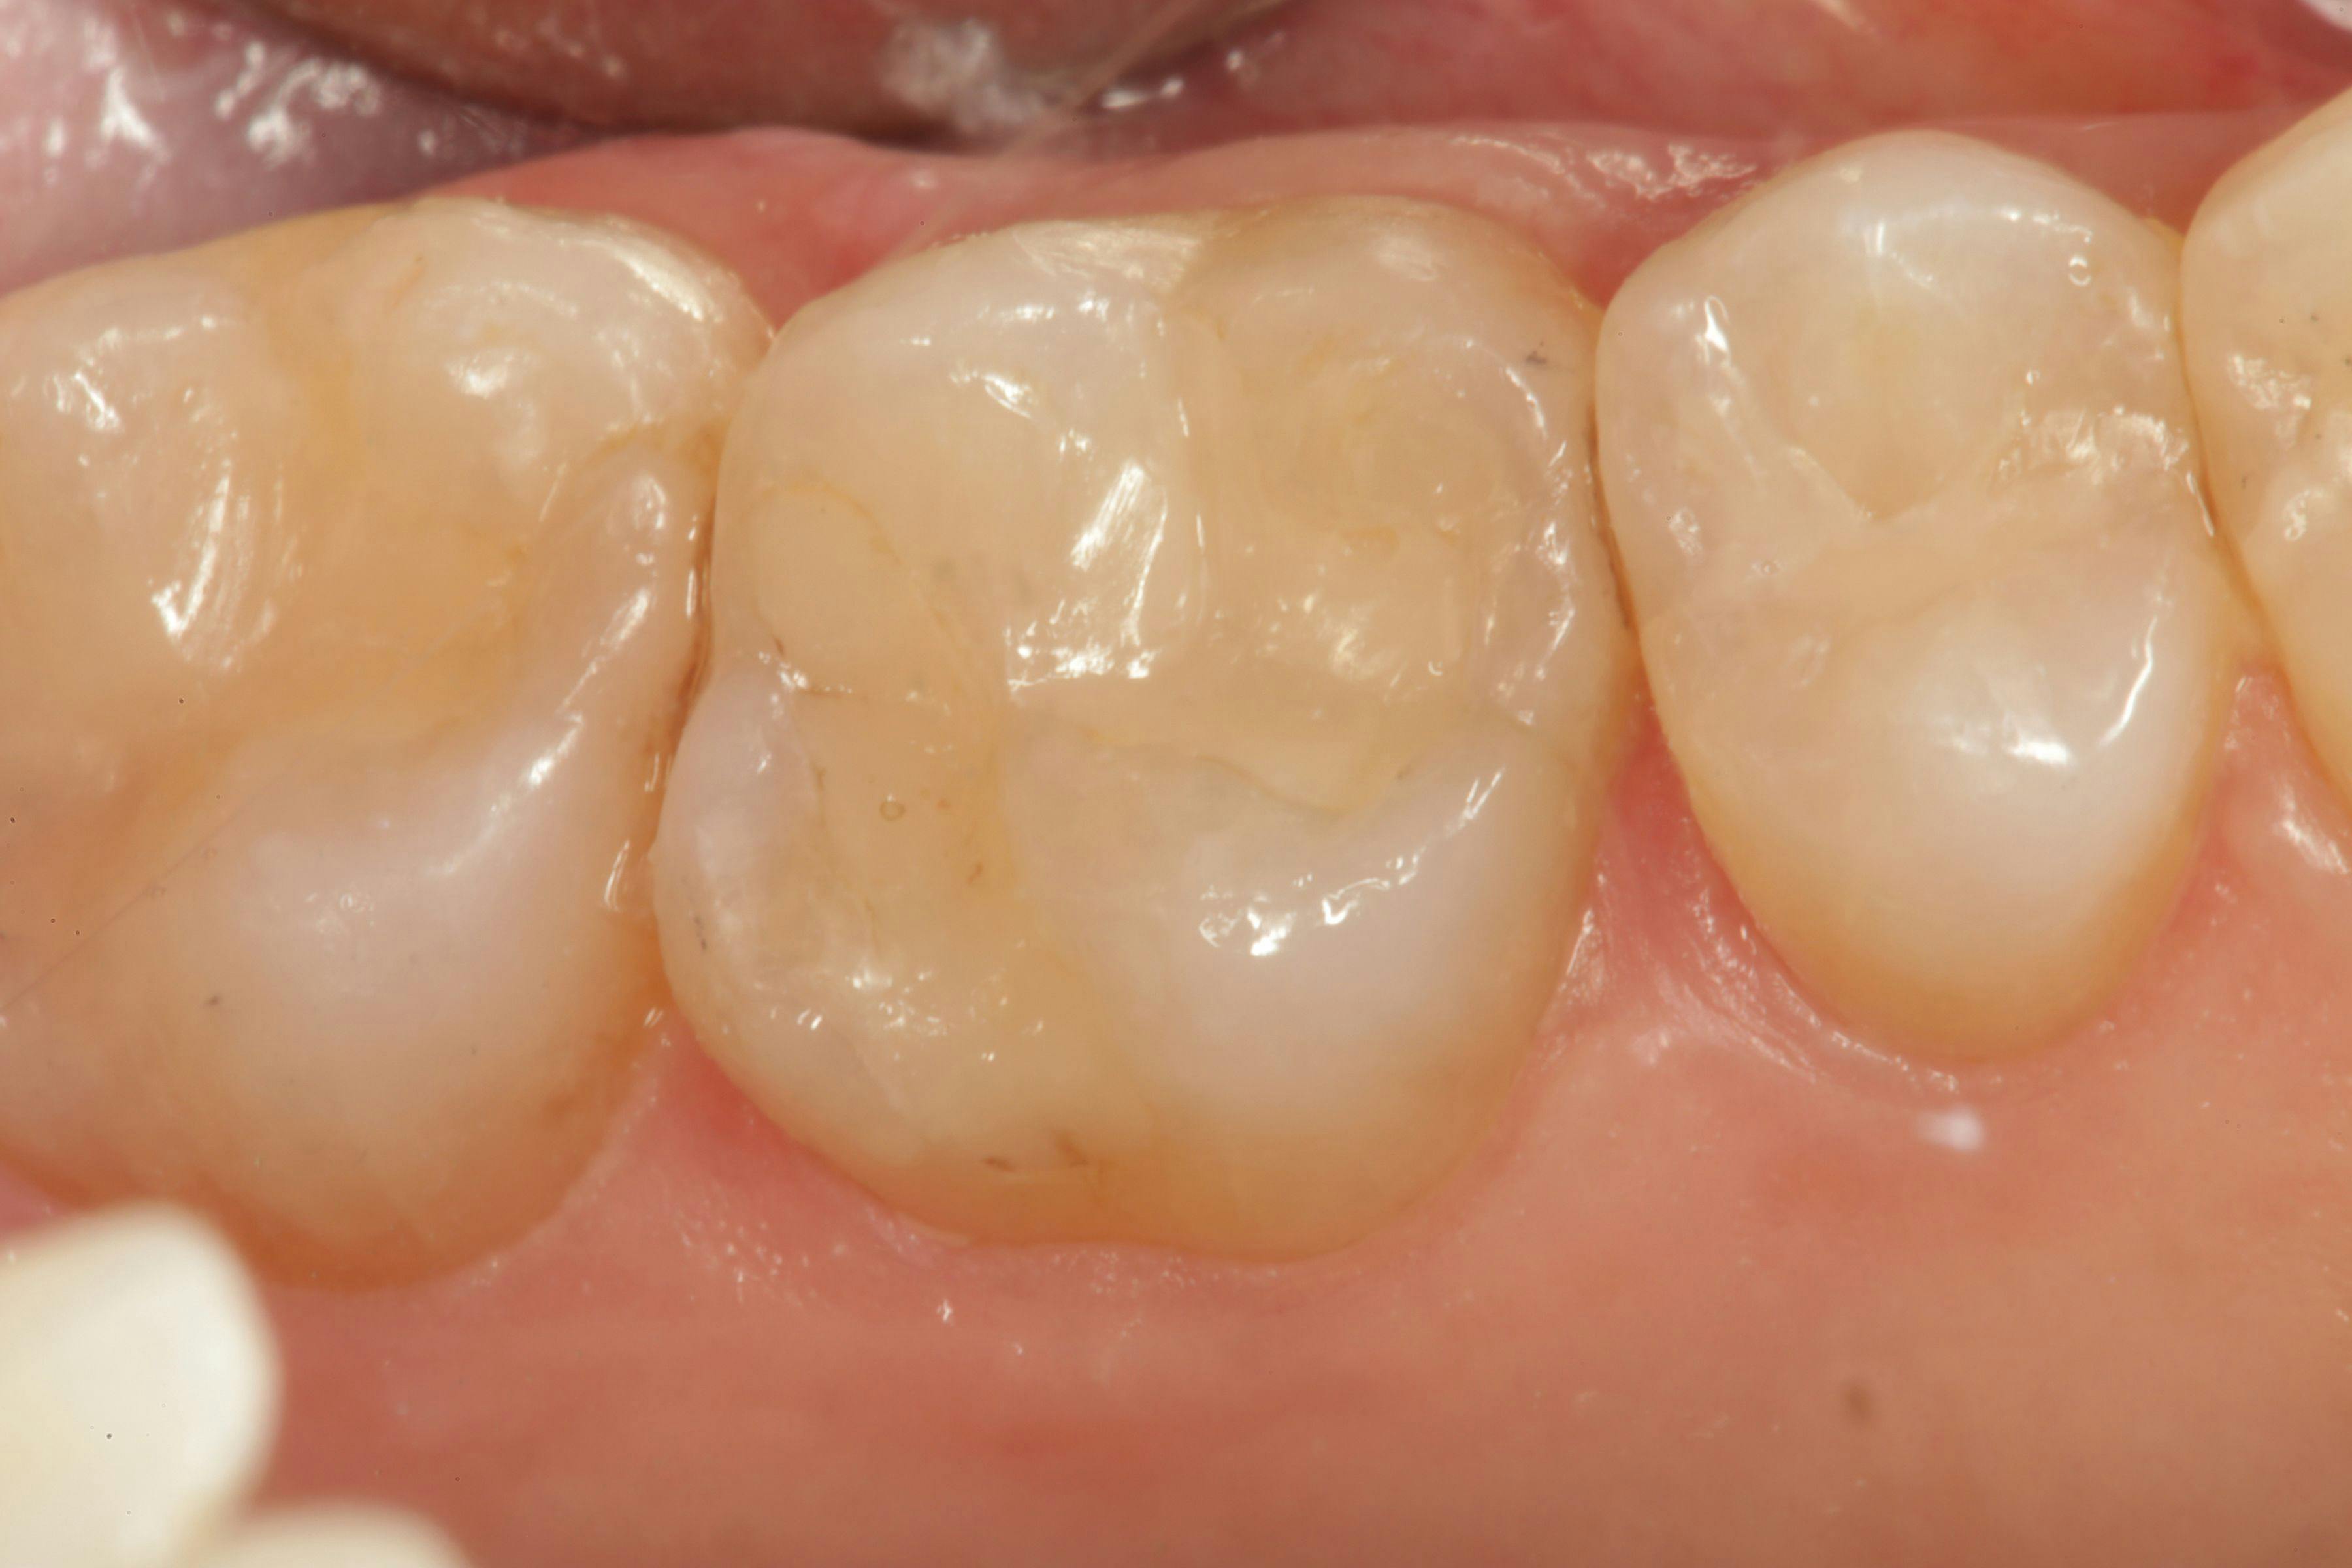 Occlusal view of the completed restoration after placing Activa Presto as the enamel layer